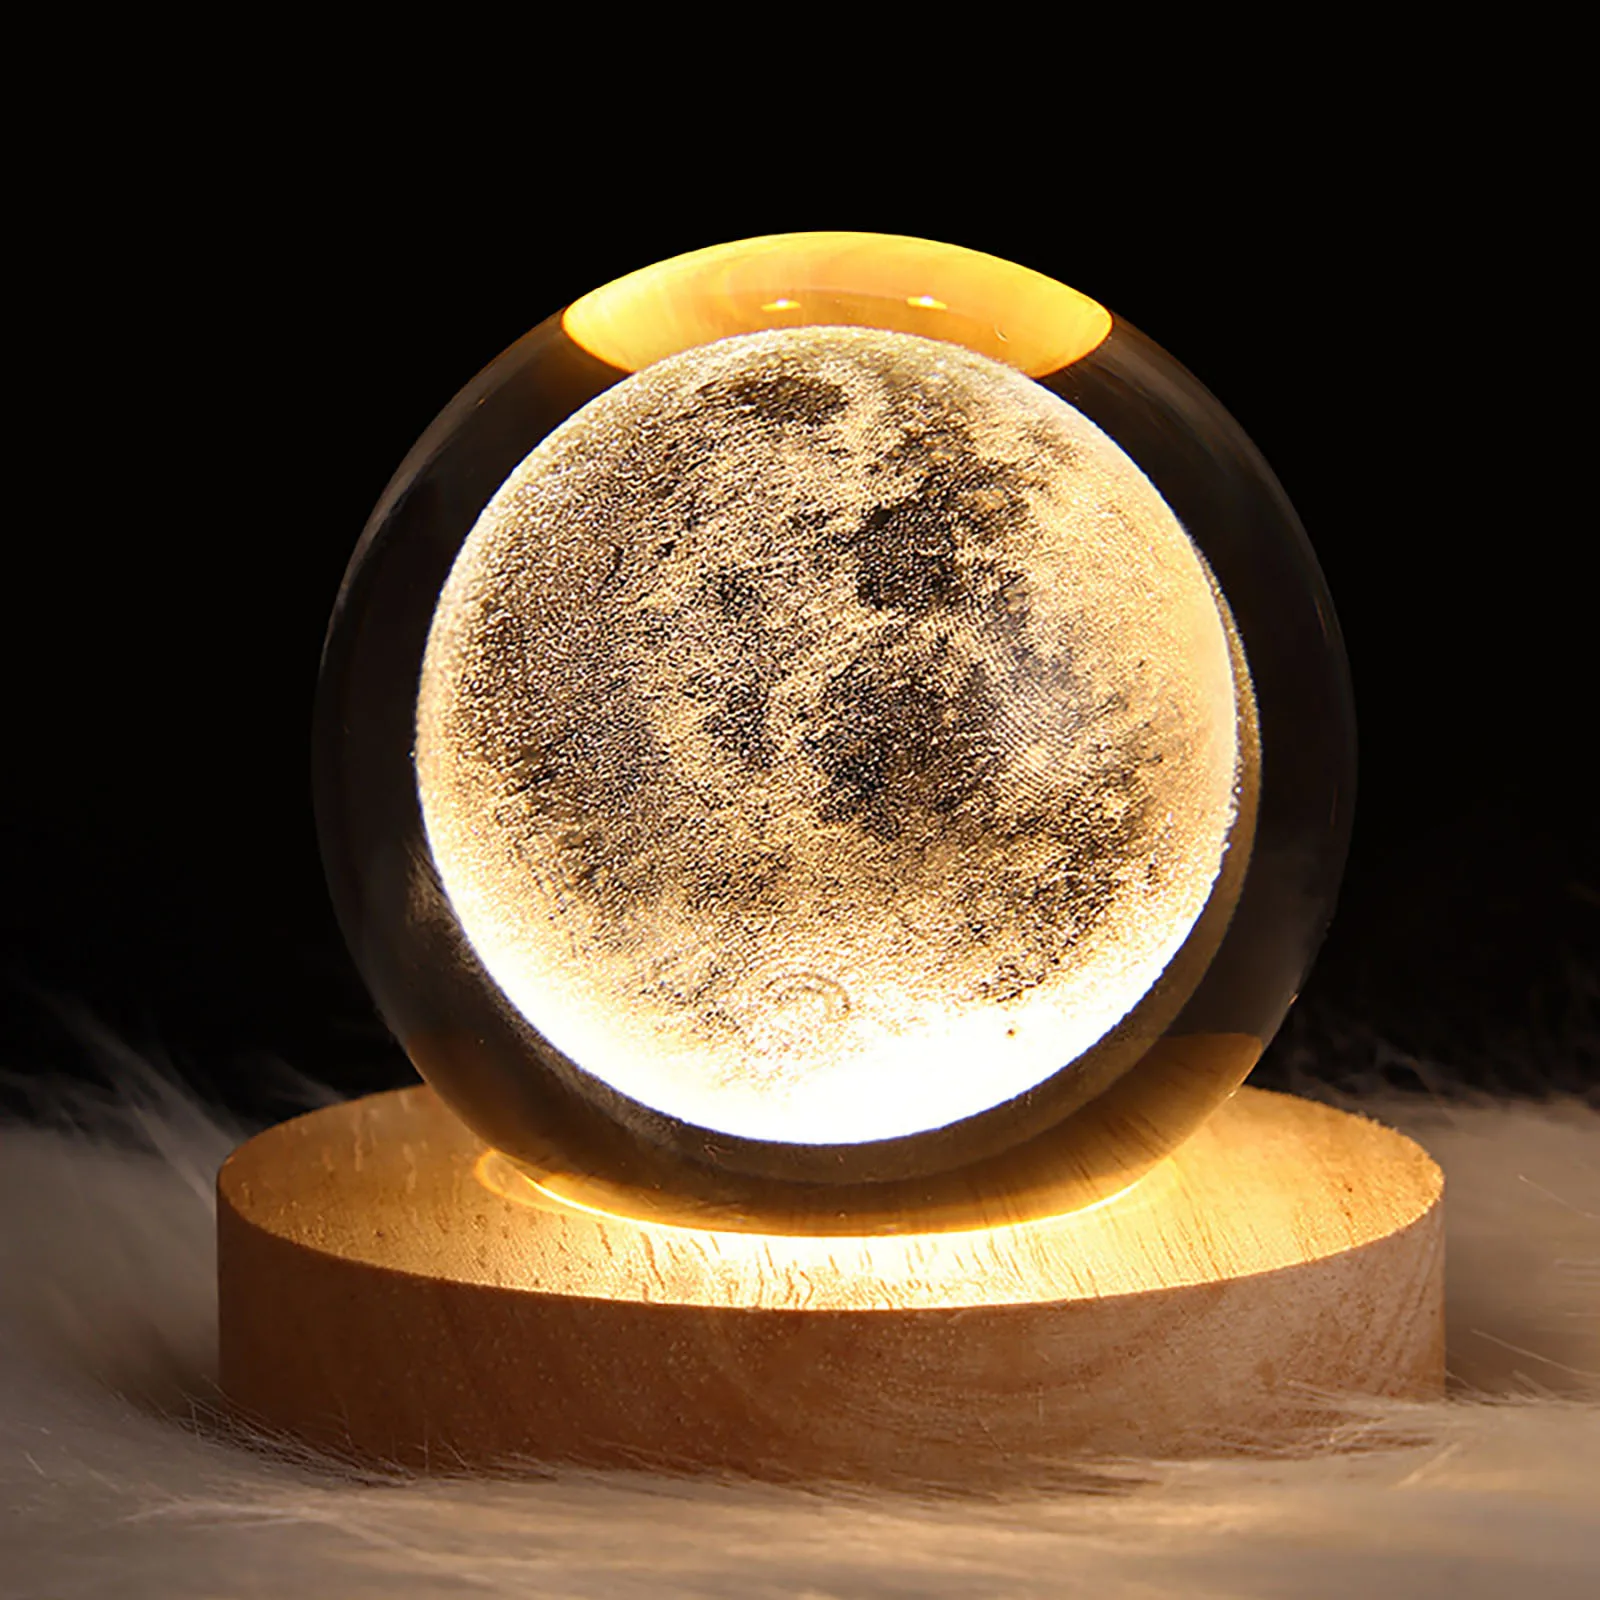 Ts glowing planet galaxy astronaut 3d moon table lamp usb atmosphere lamp tabletop thumb155 crop